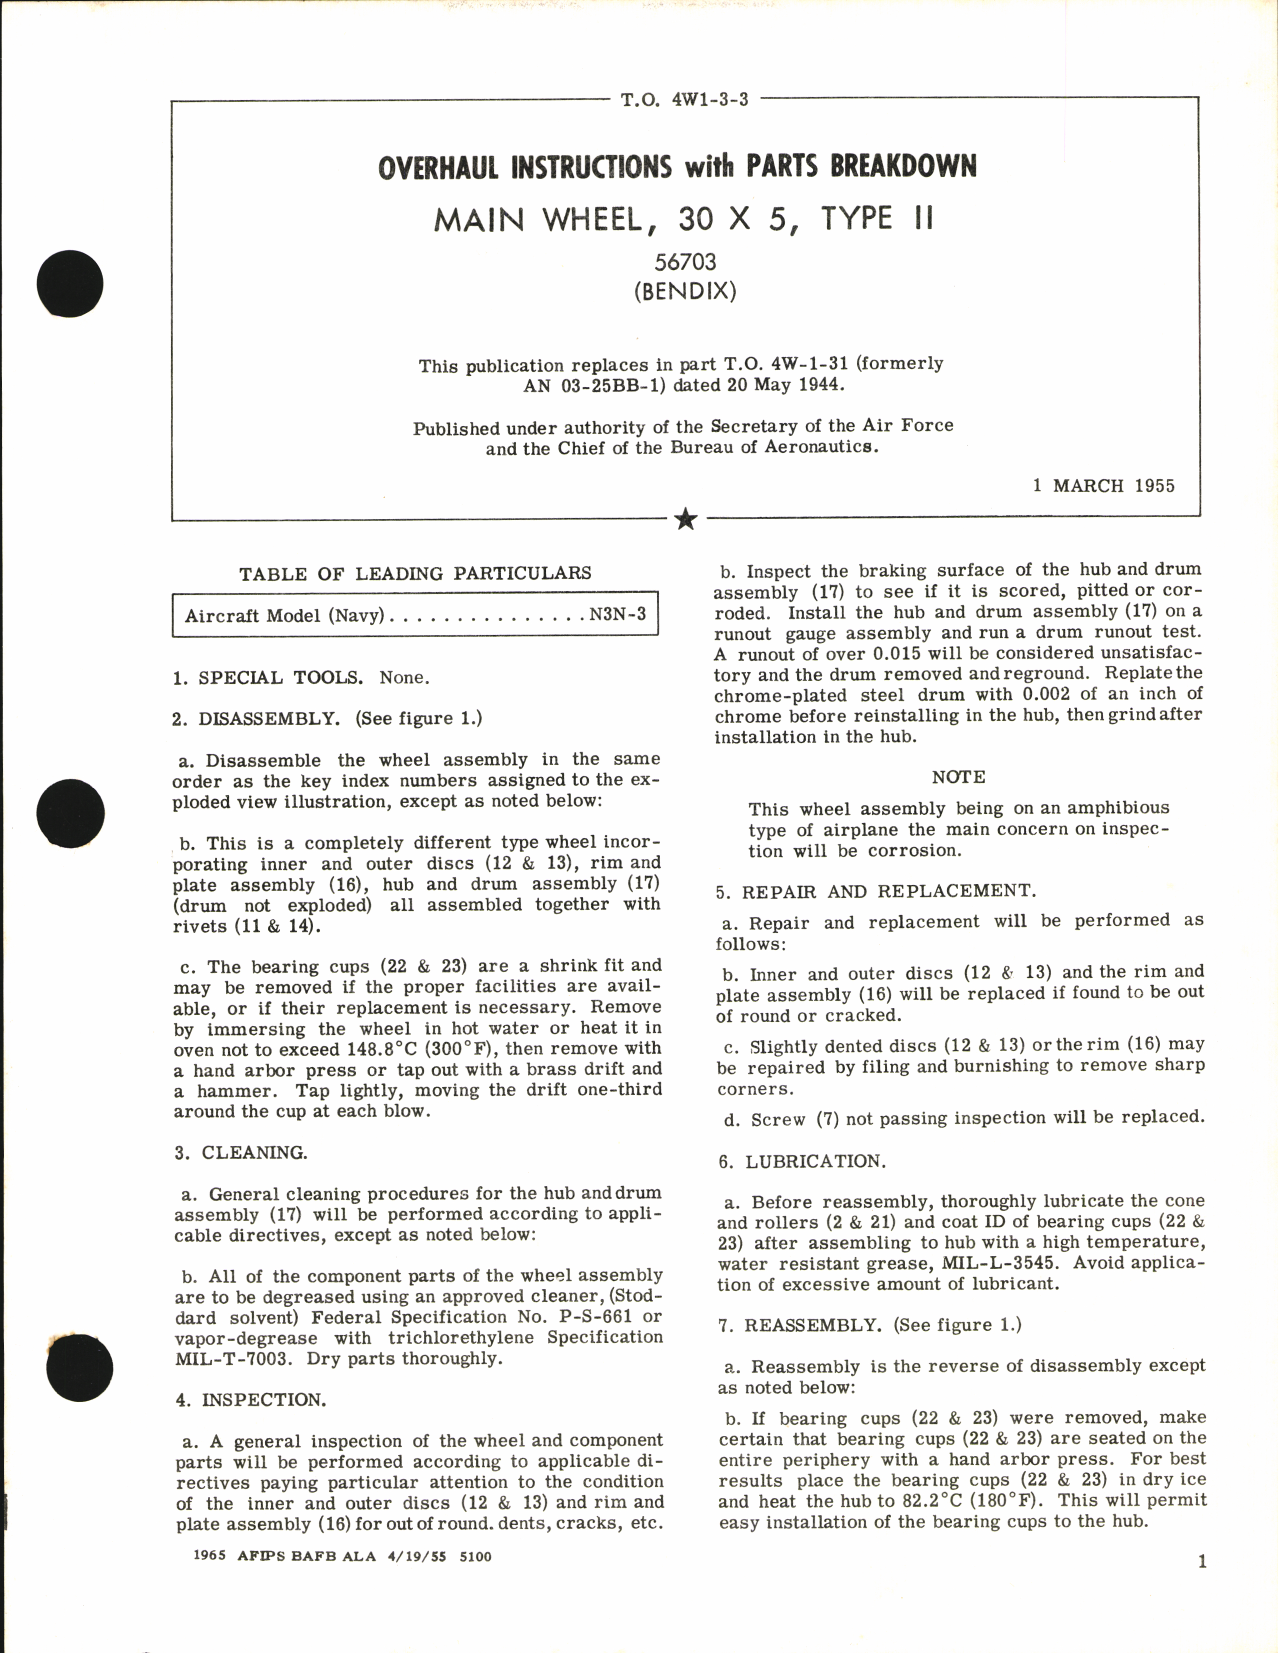 Sample page 1 from AirCorps Library document: Overhaul Instructions with Parts Breakdown for Main Wheel 30 x 5, Type II